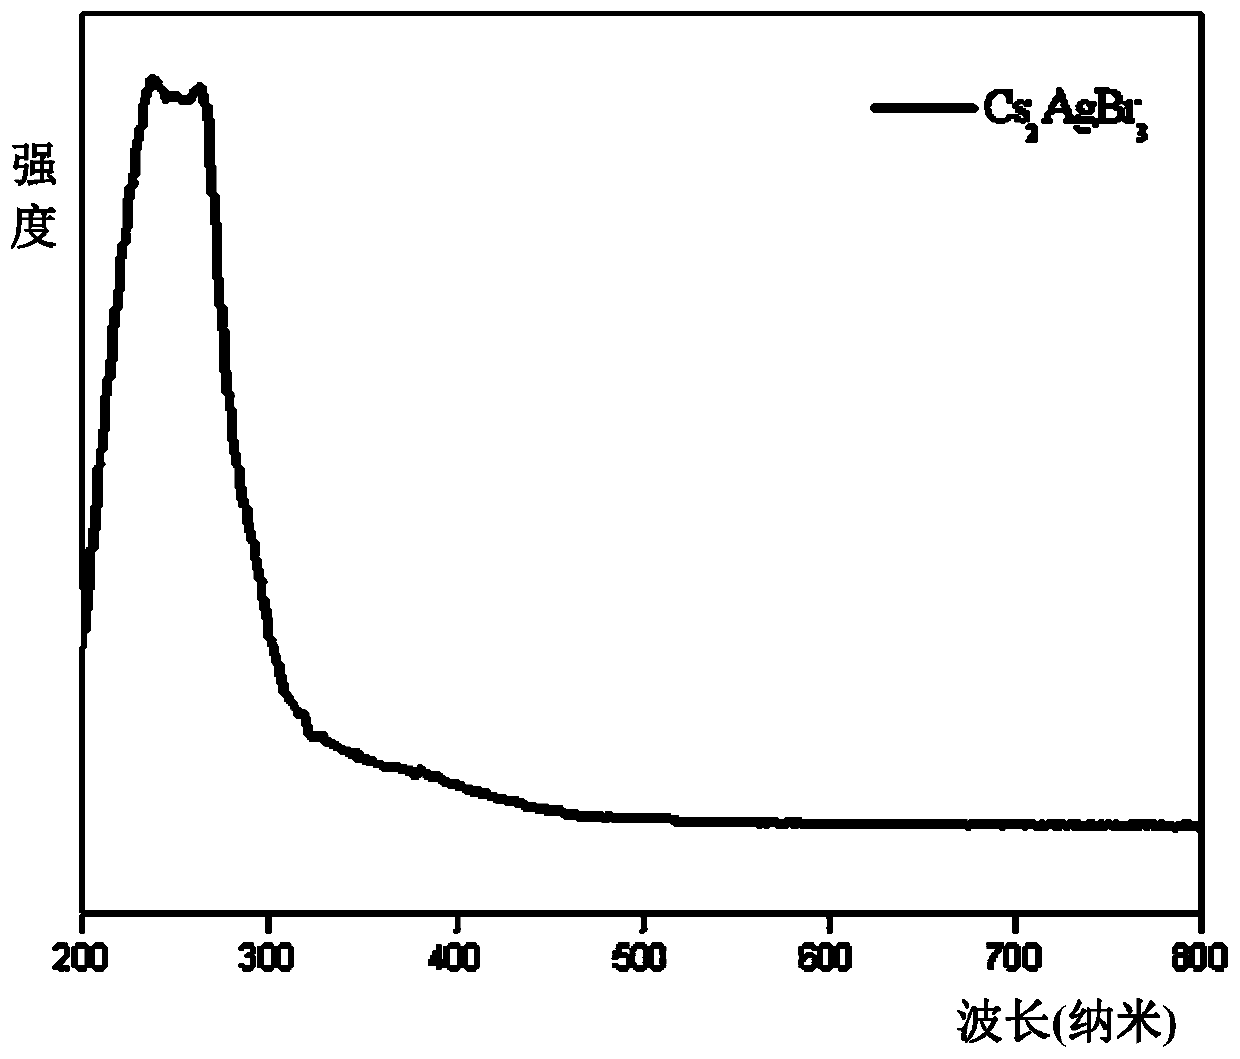 Method for efficient synthesis of Cs2AgBr3 non-lead all-inorganic perovskite